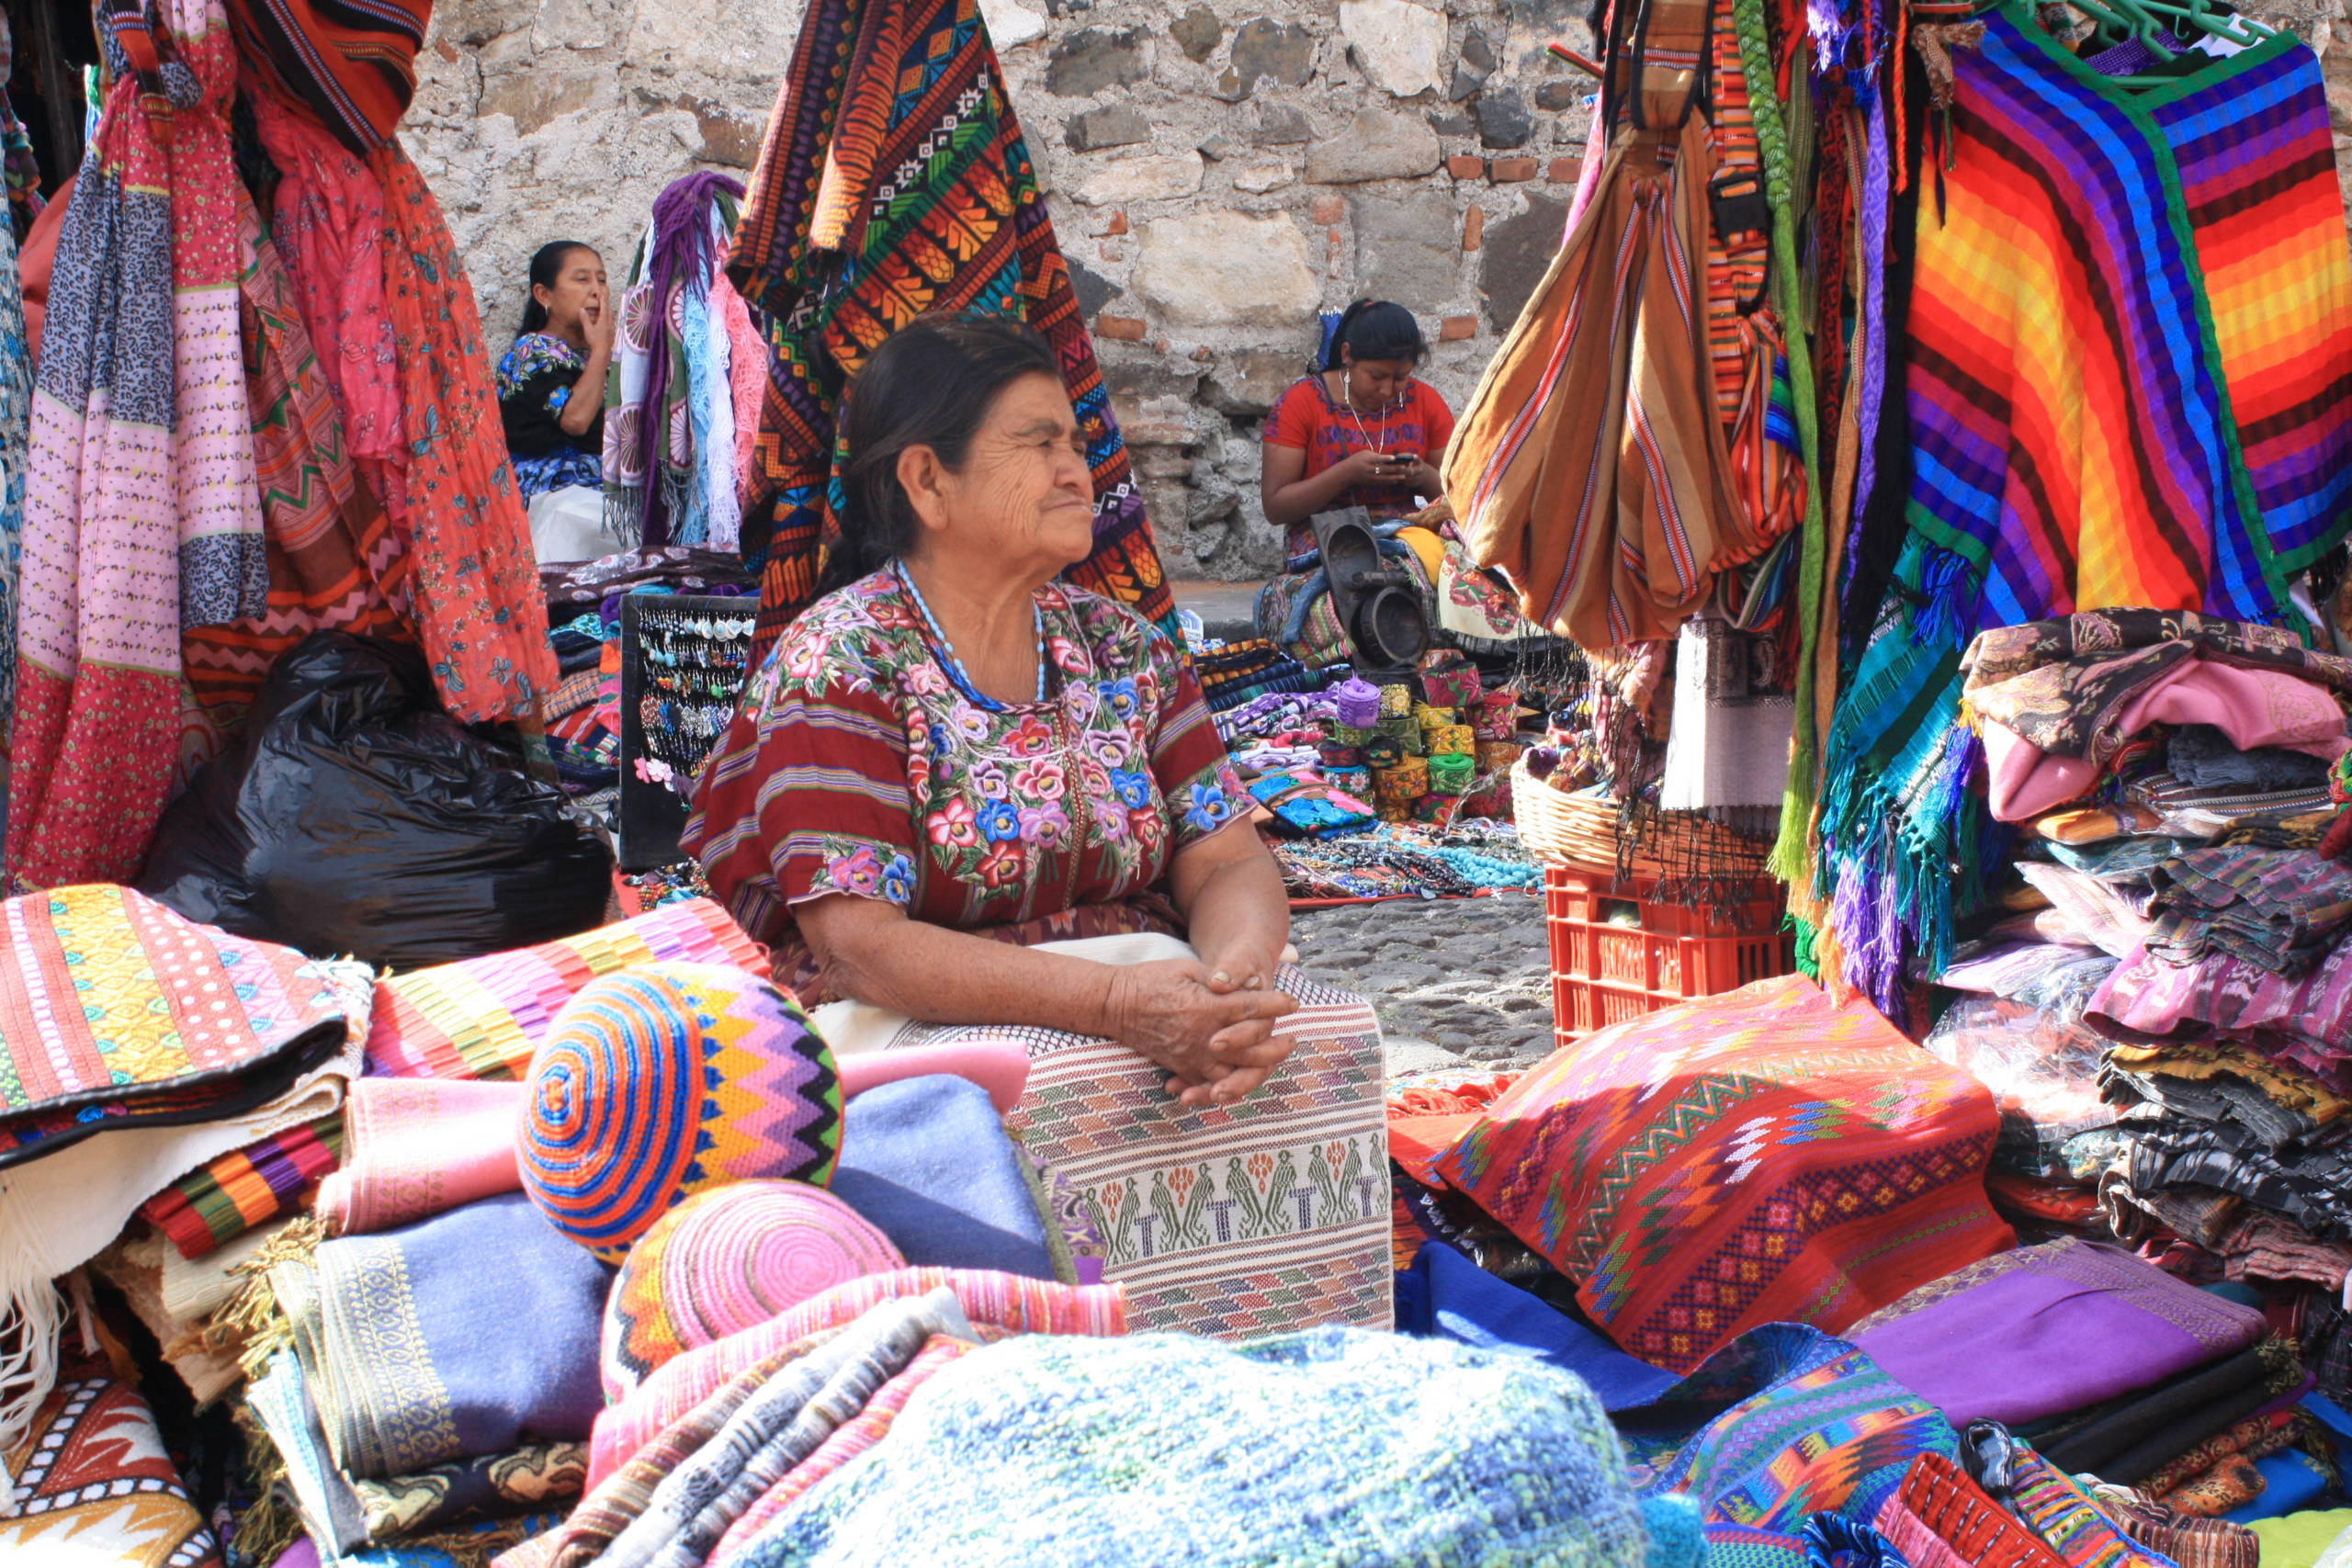 Day 1. Colorful crafts in Guatemala